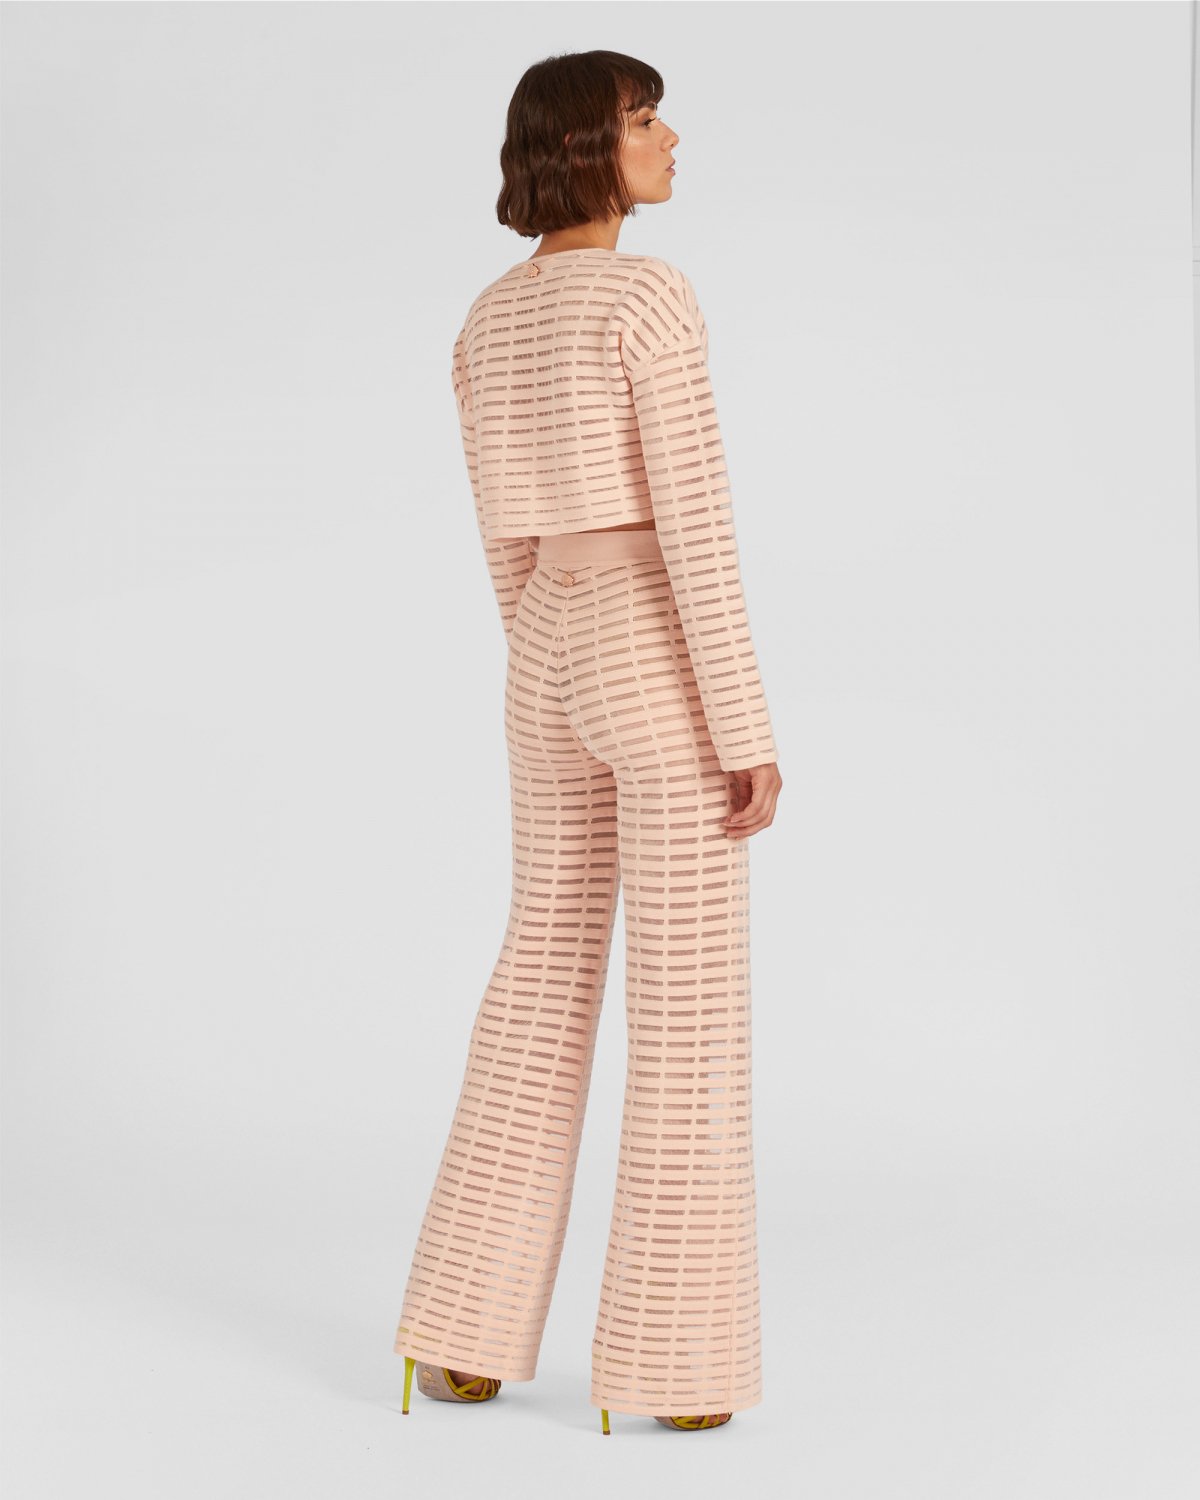 Iconic knit top | Fall Winter 2023-24, PRE-FALL Collection 2023, Tops & Blouses, Knitwear, Knitted tops, Crop tops, Crop tops | Genny